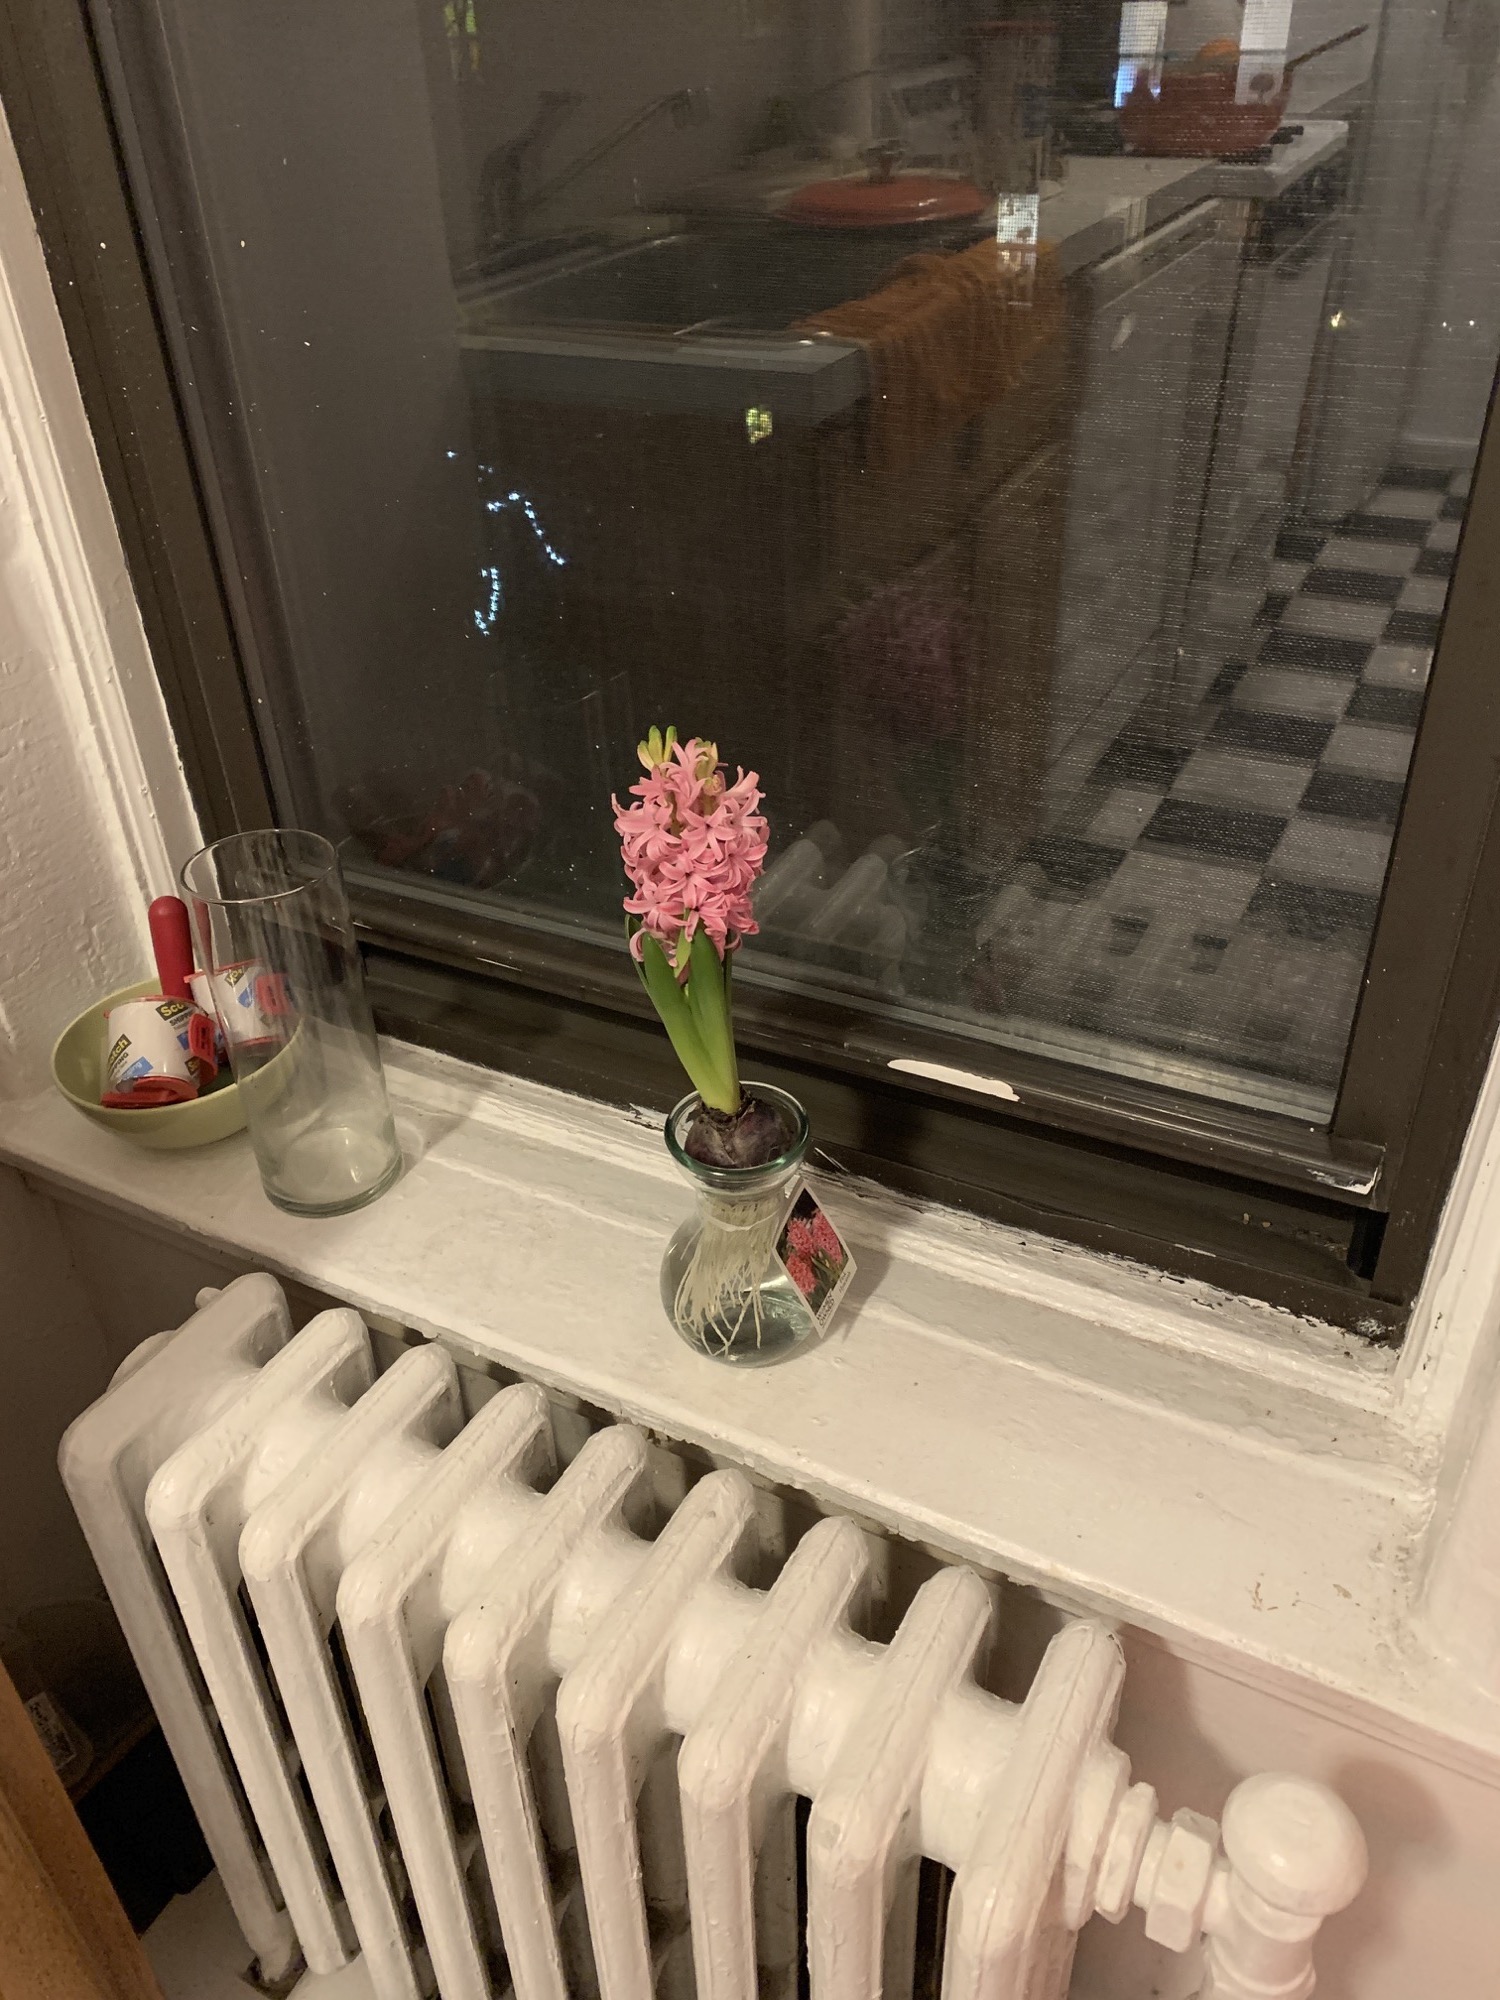 Orchid on window sill